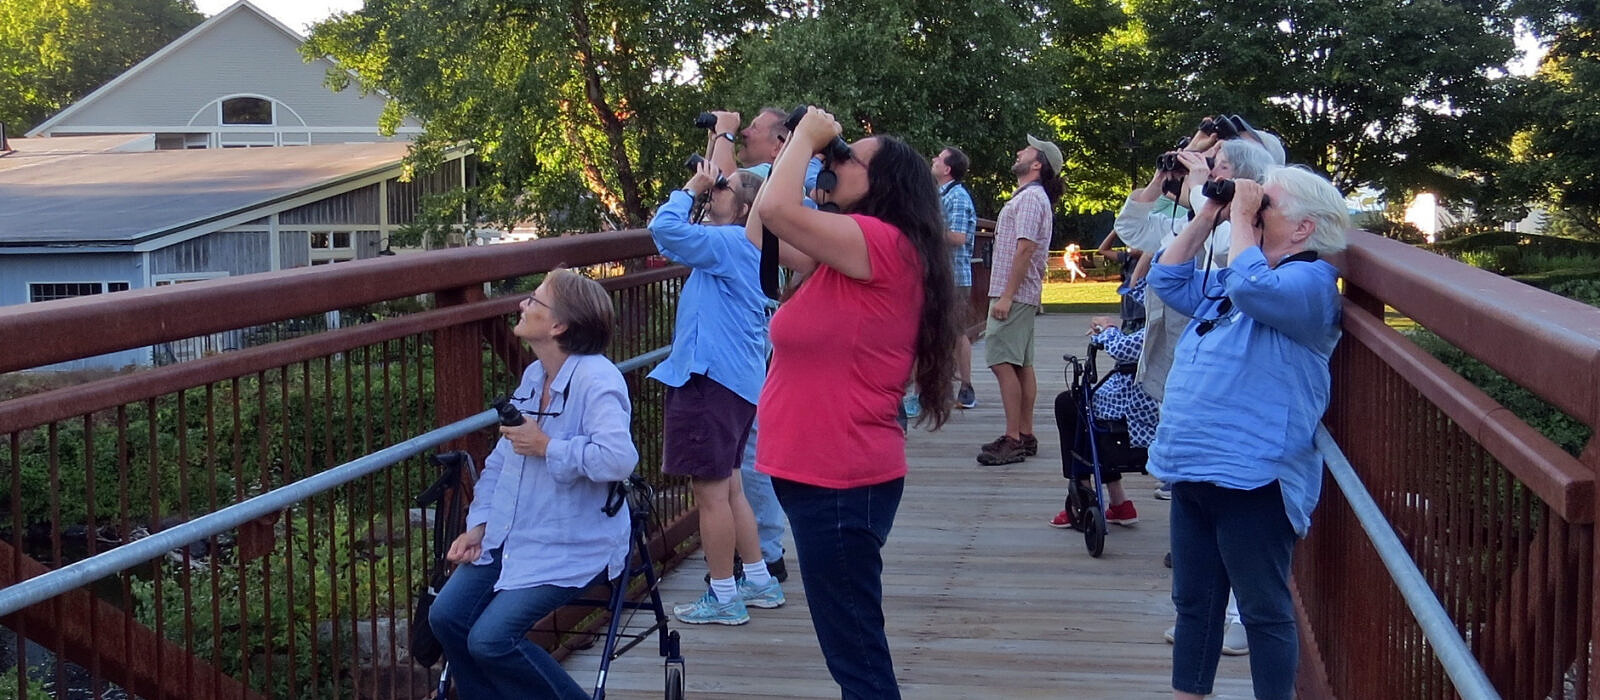 Our new Birding for All outings offer opportunities for people of all abilities and levels of birding experience to enjoy wild birds (photo: Meade Cadot)